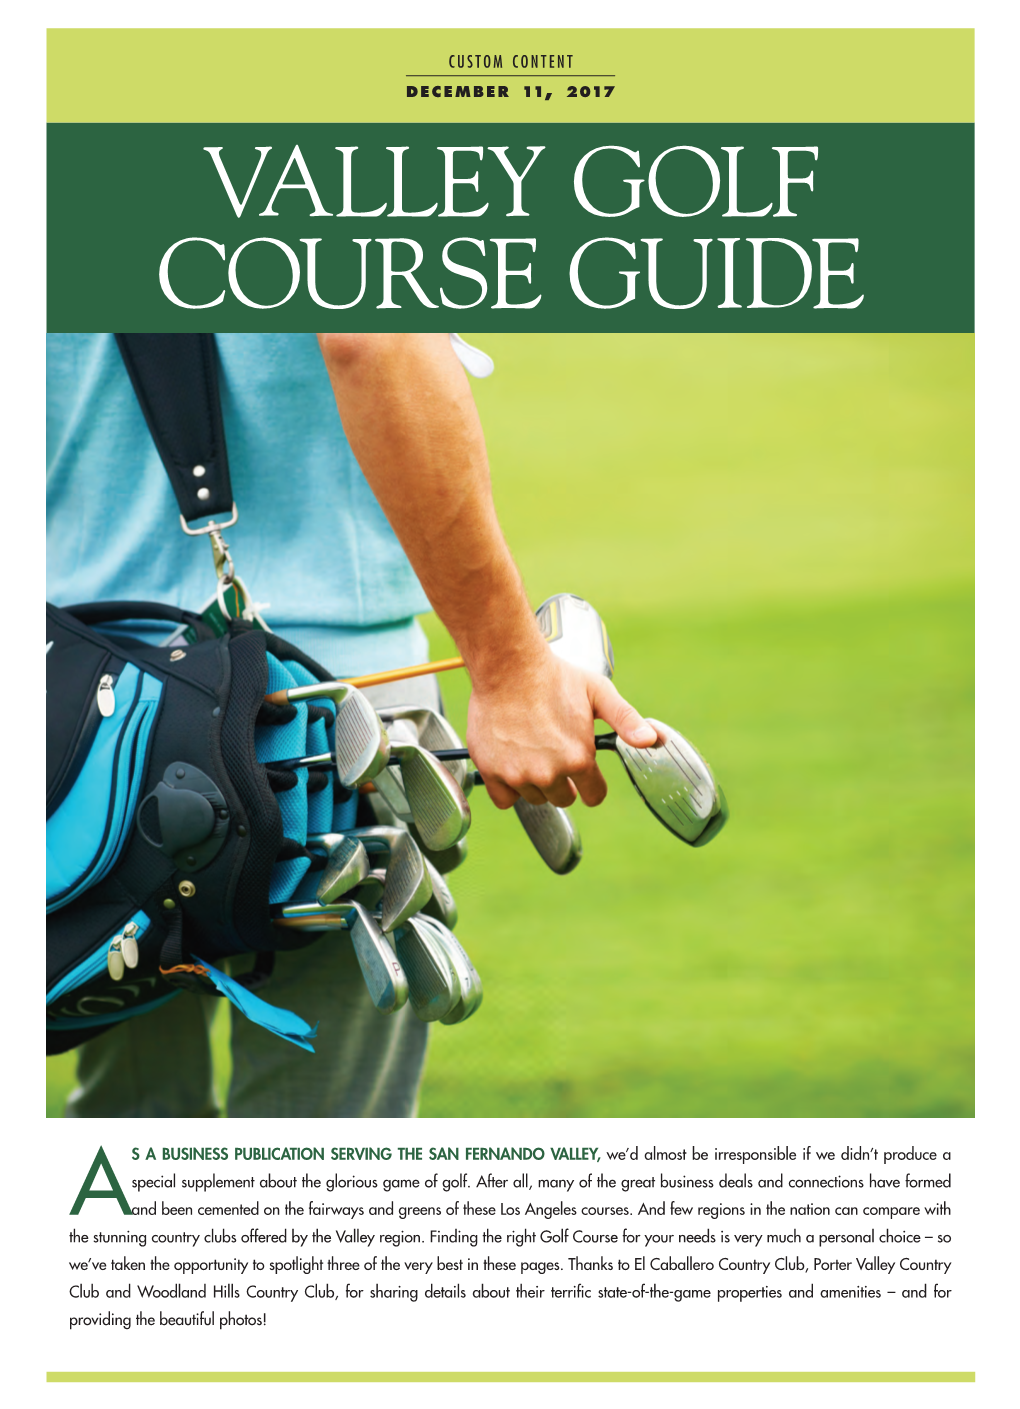 Valley Golf Course Guide